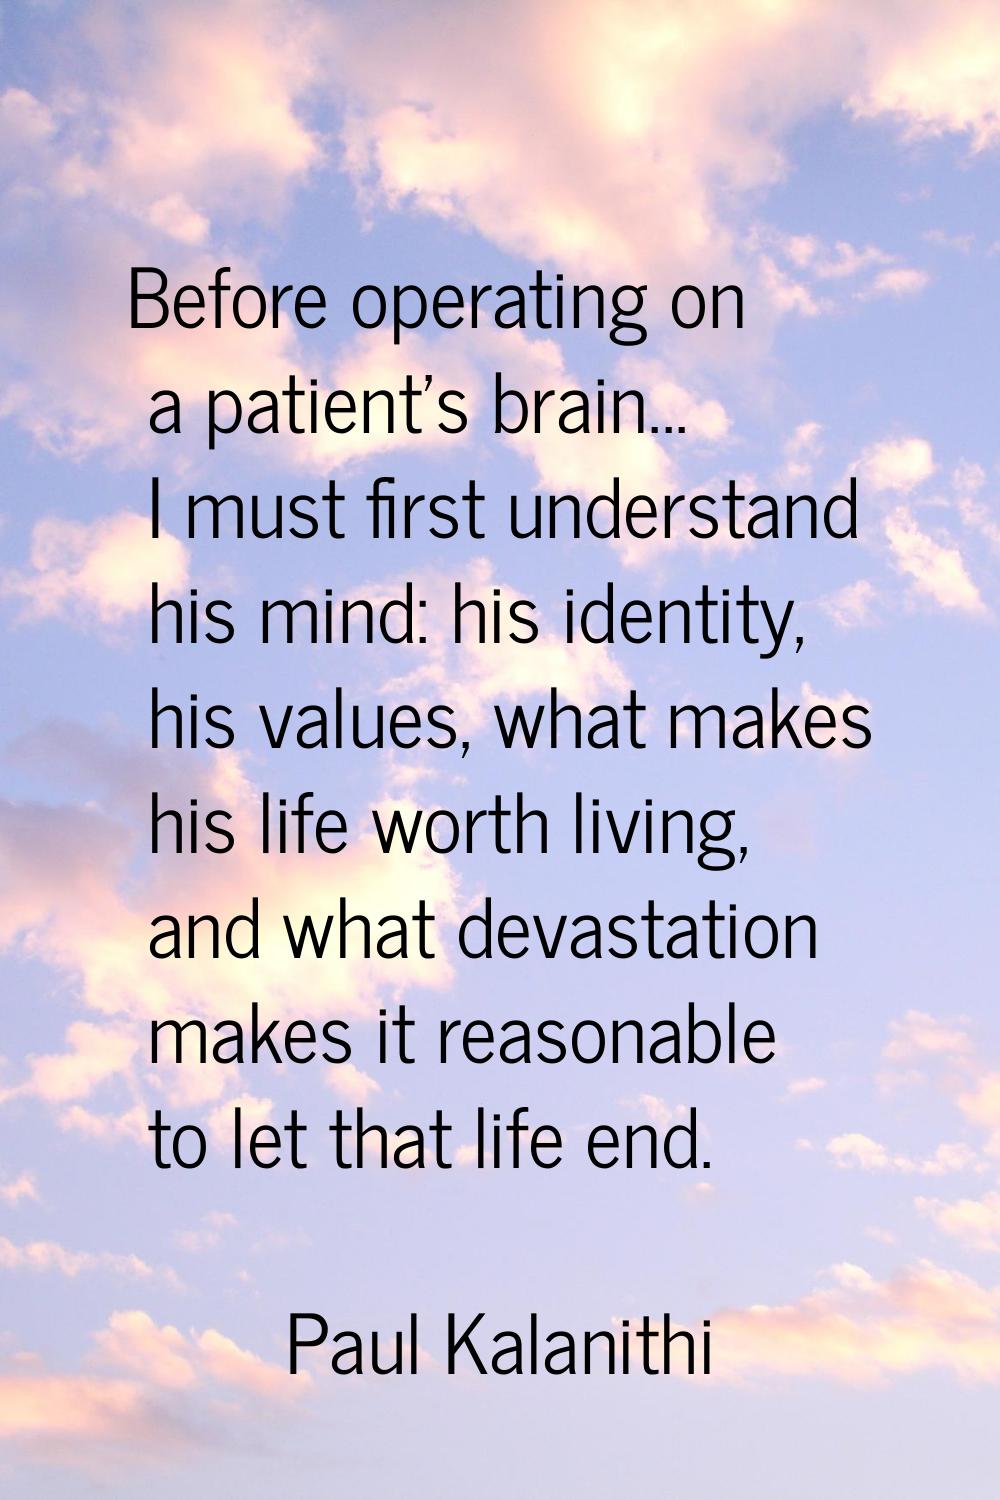 Before operating on a patient's brain... I must first understand his mind: his identity, his values